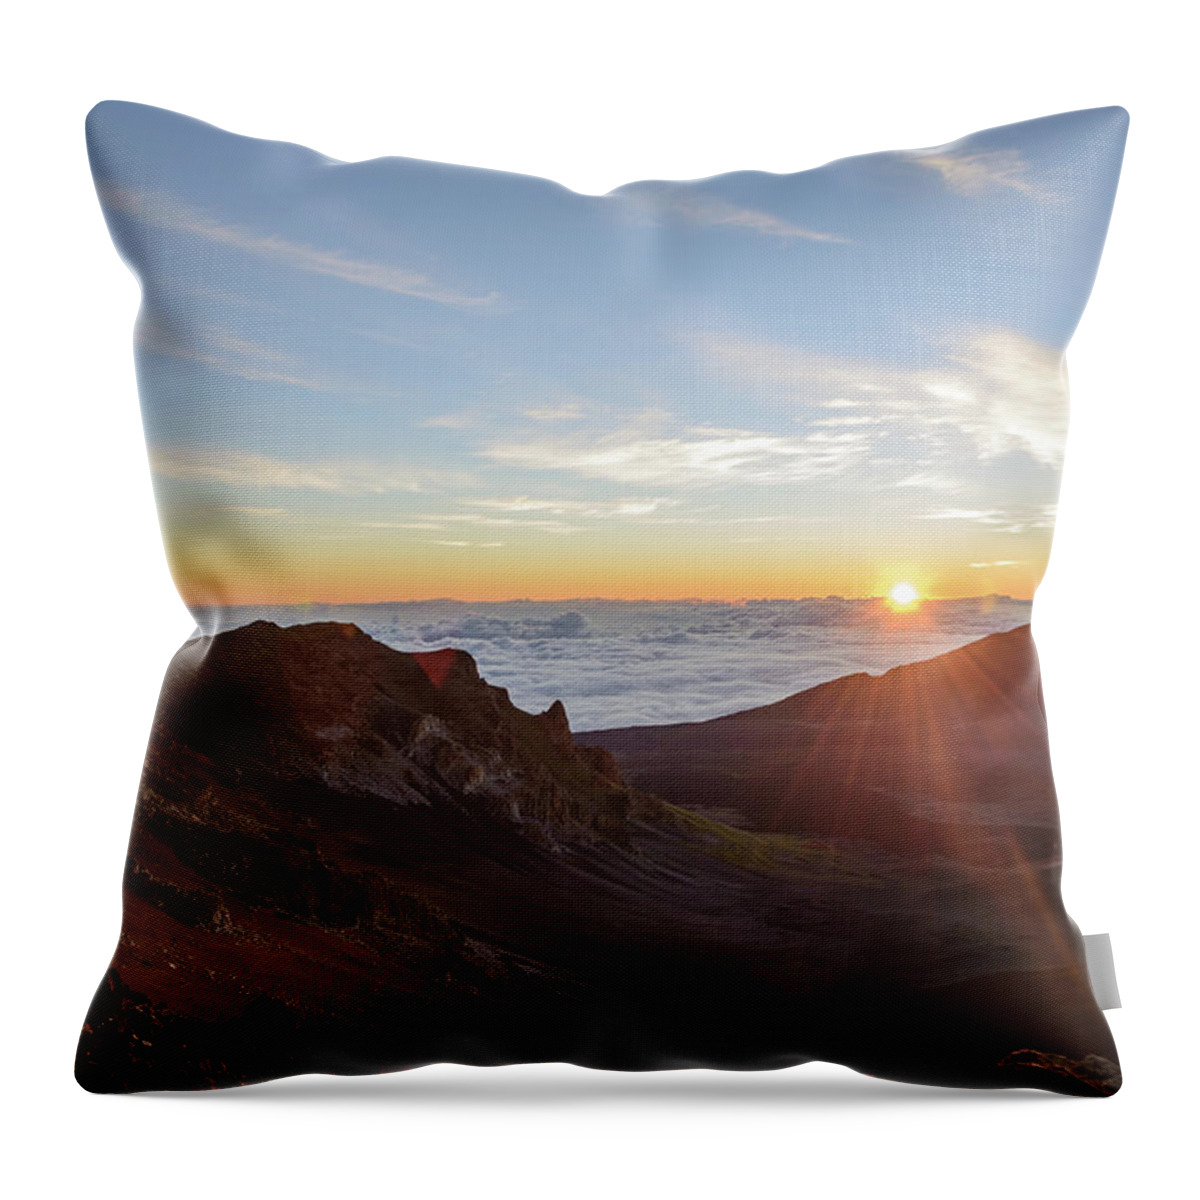 Scenics Throw Pillow featuring the photograph Sunrise At Haleakala by Photo By Robert Vaughn